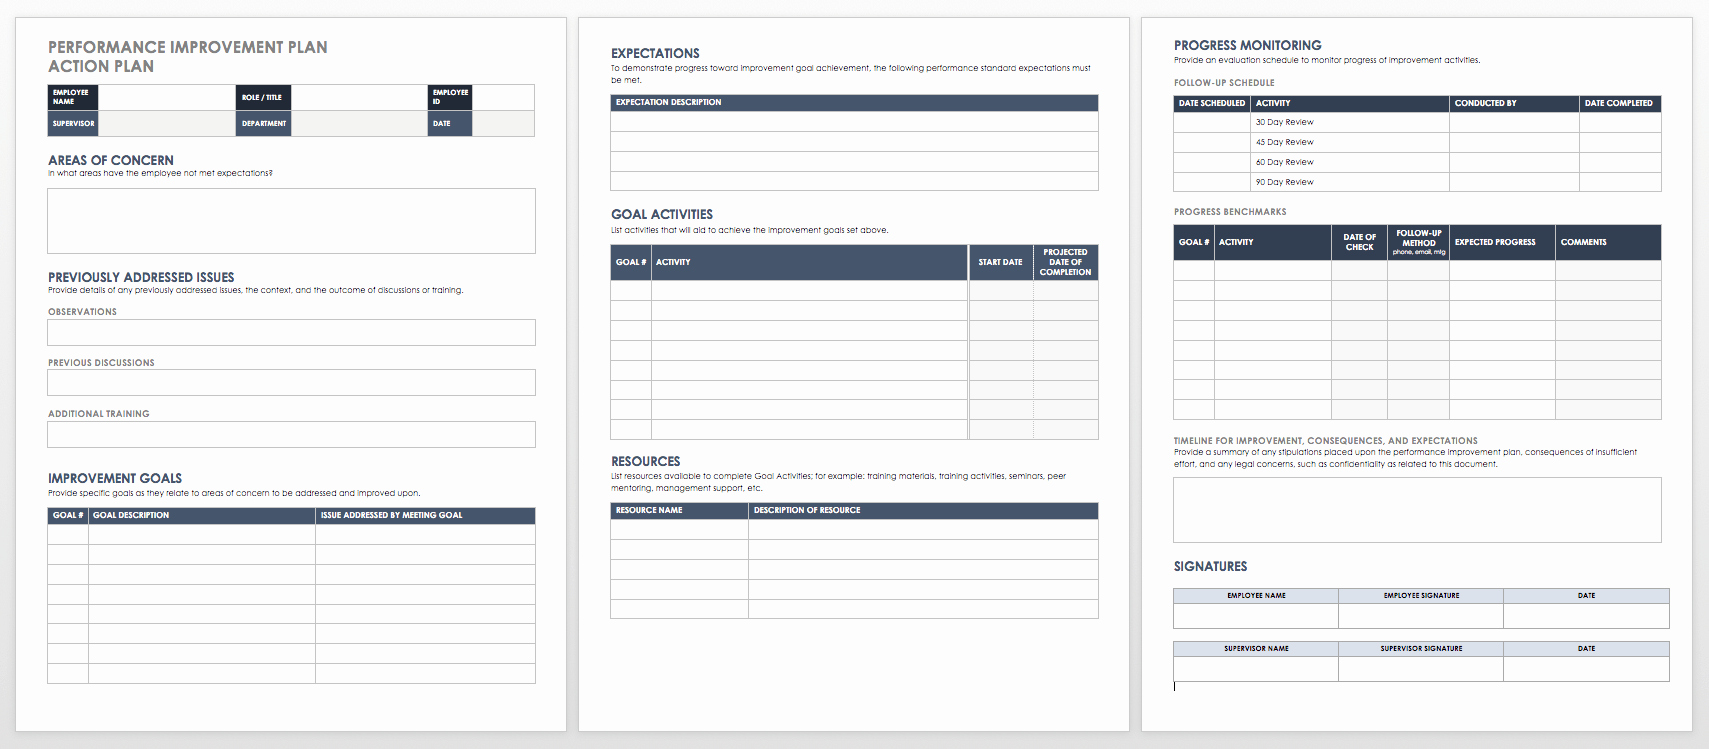 Performance Action Plan Template Lovely Performance Improvement Plan Templates